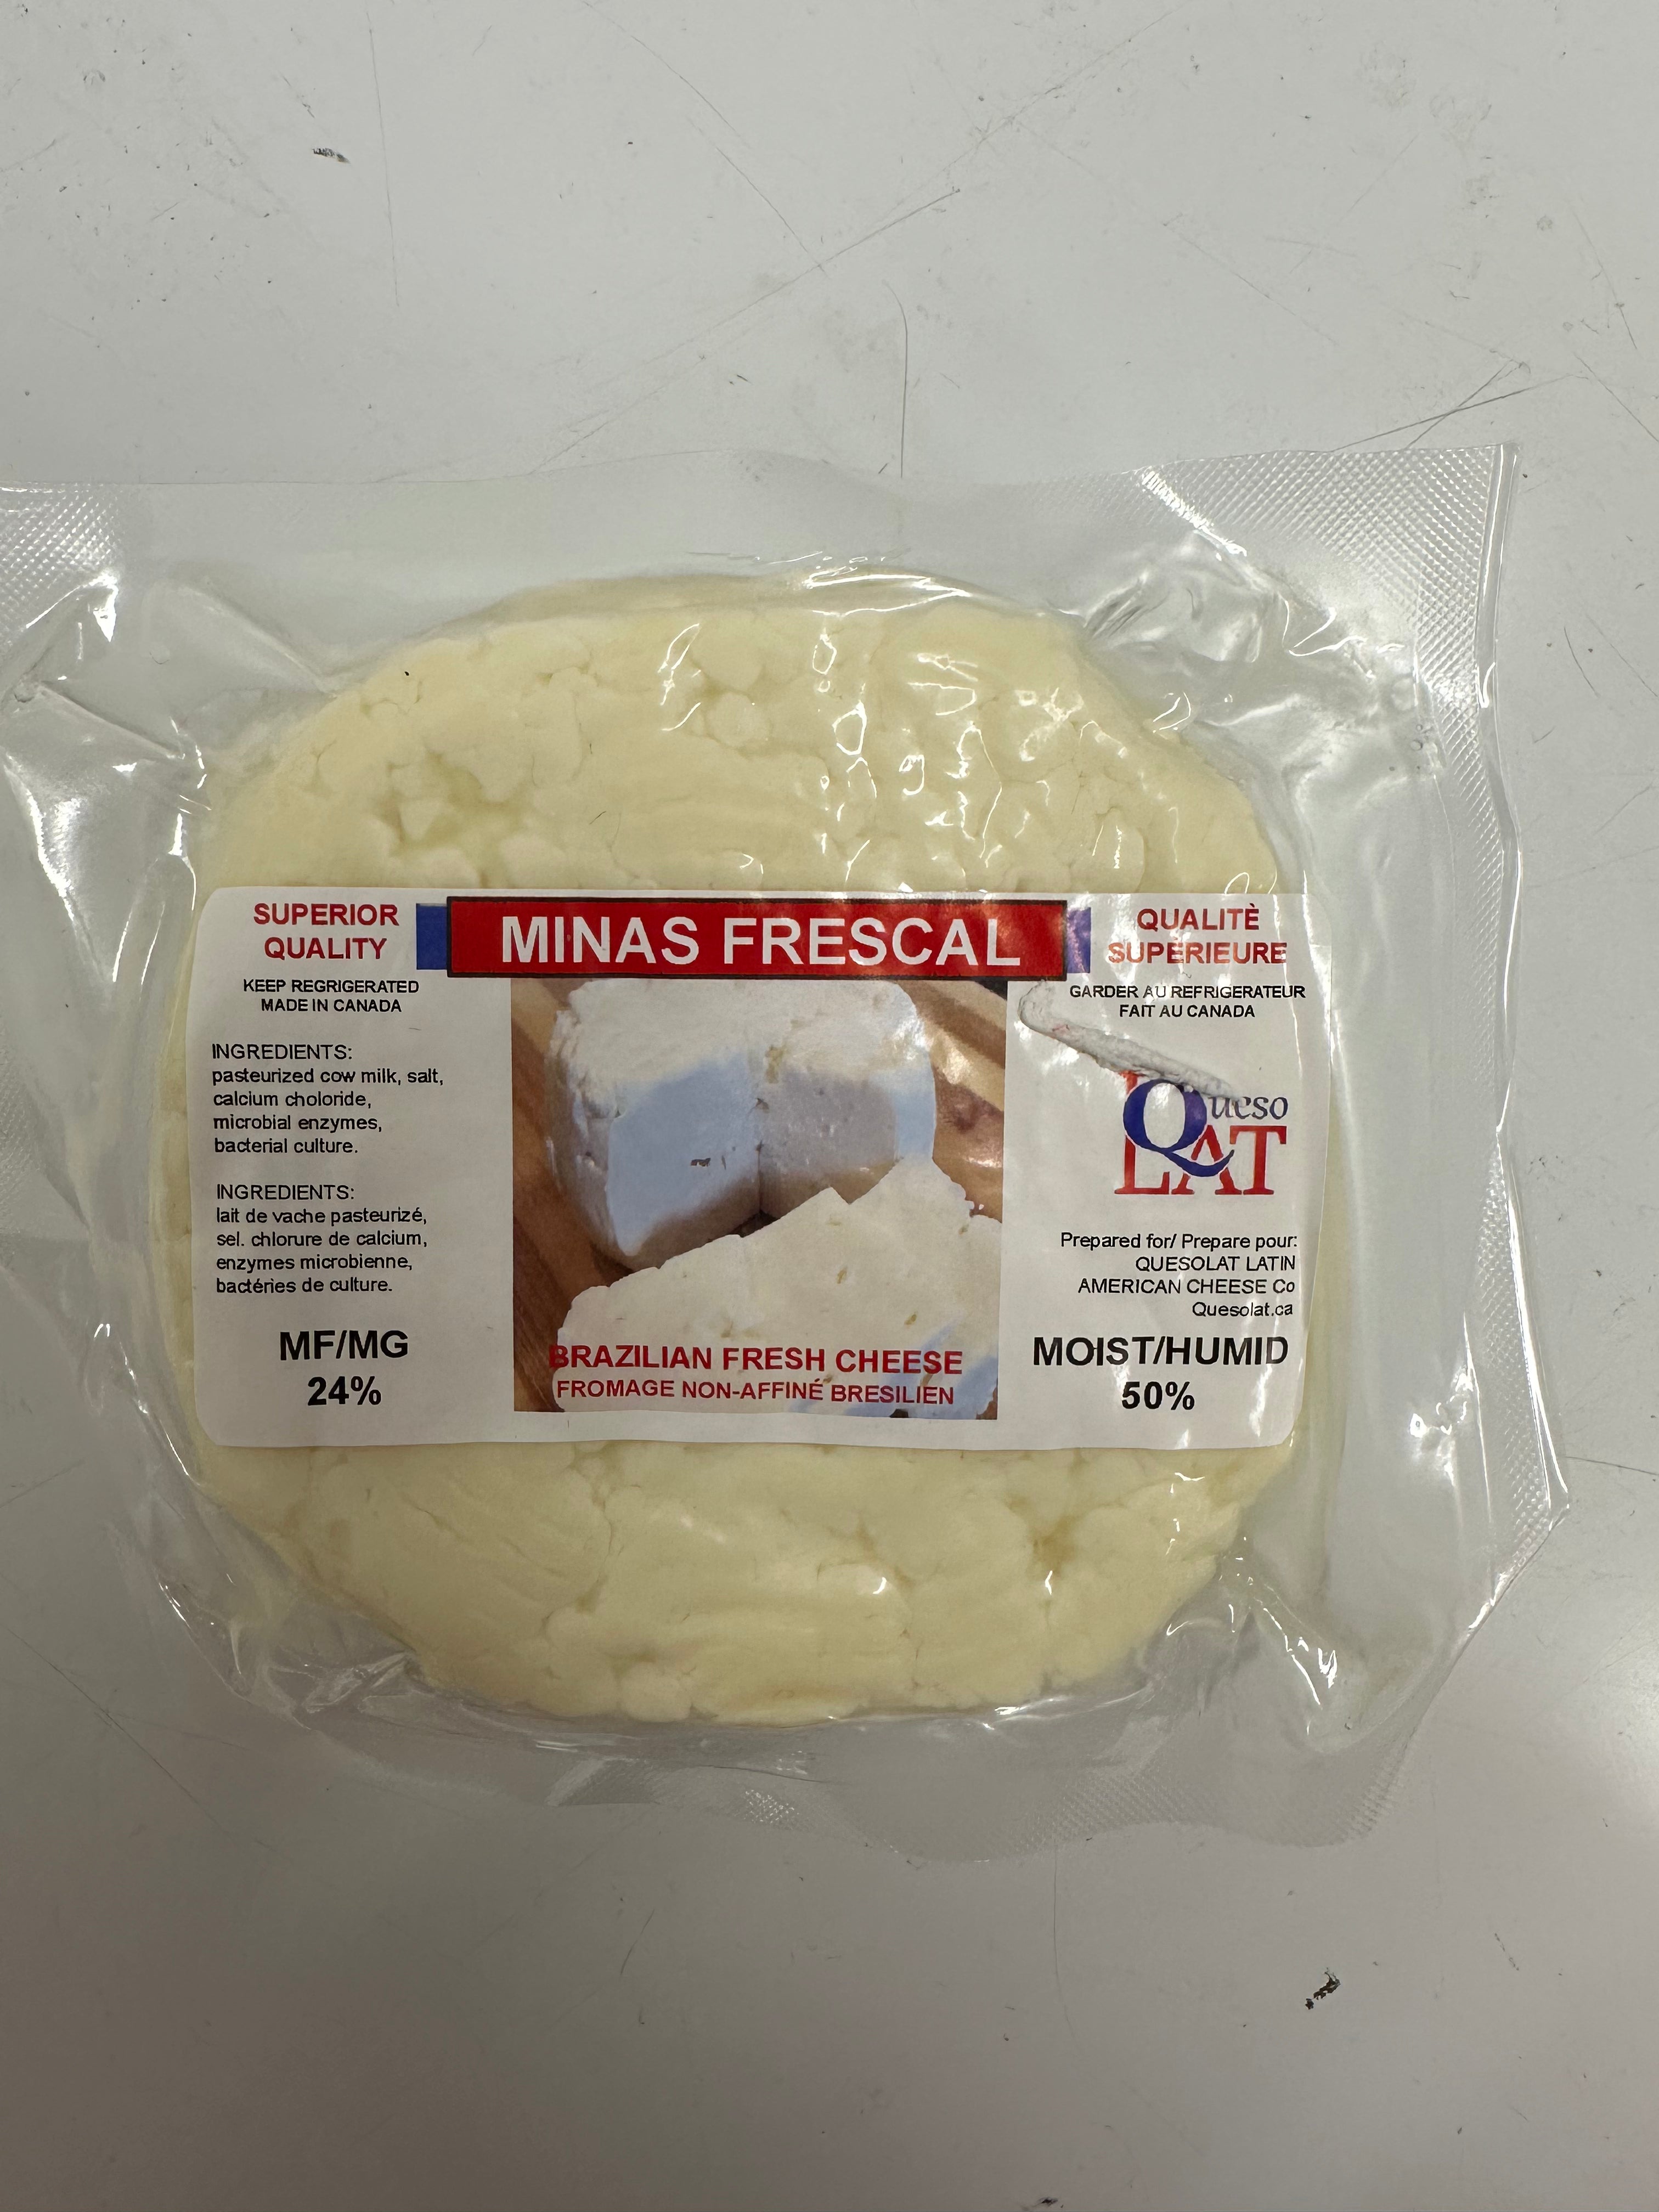 QUESOLAT - Fromage Frescal Minas - 400g